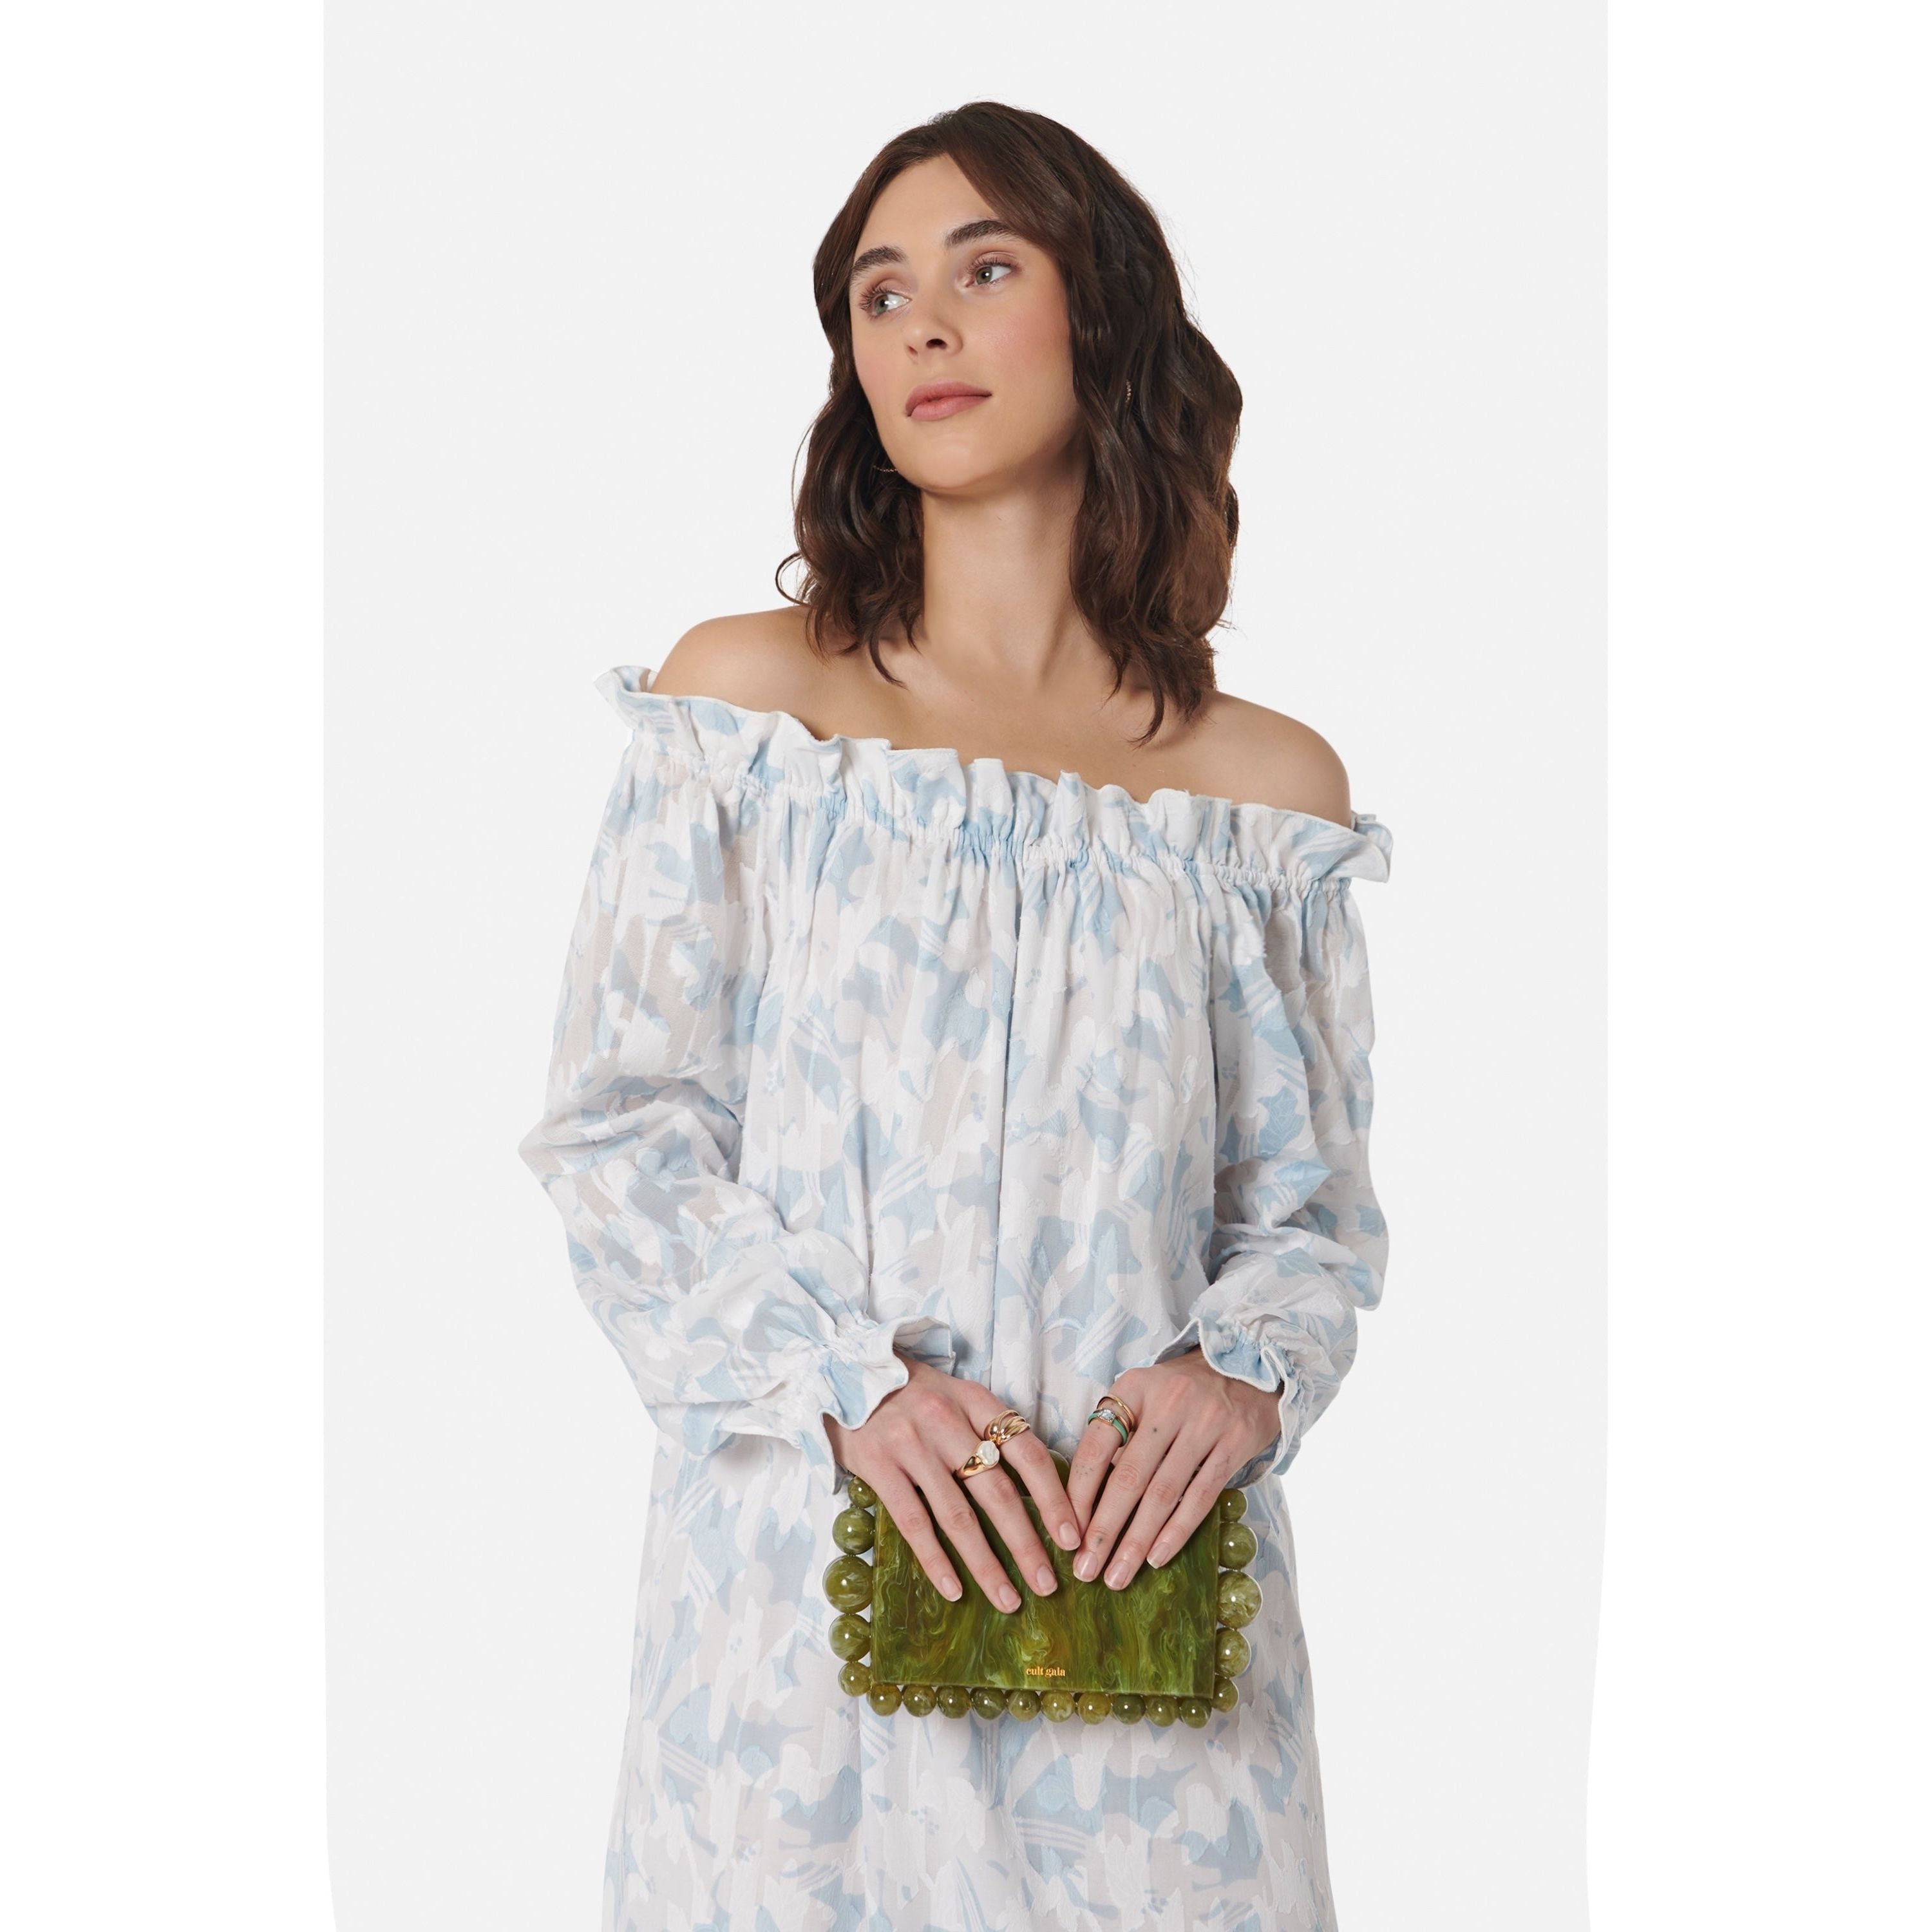 Women's Grace Dress in Pastel Blue & White Cotton Floral by Casey Marks